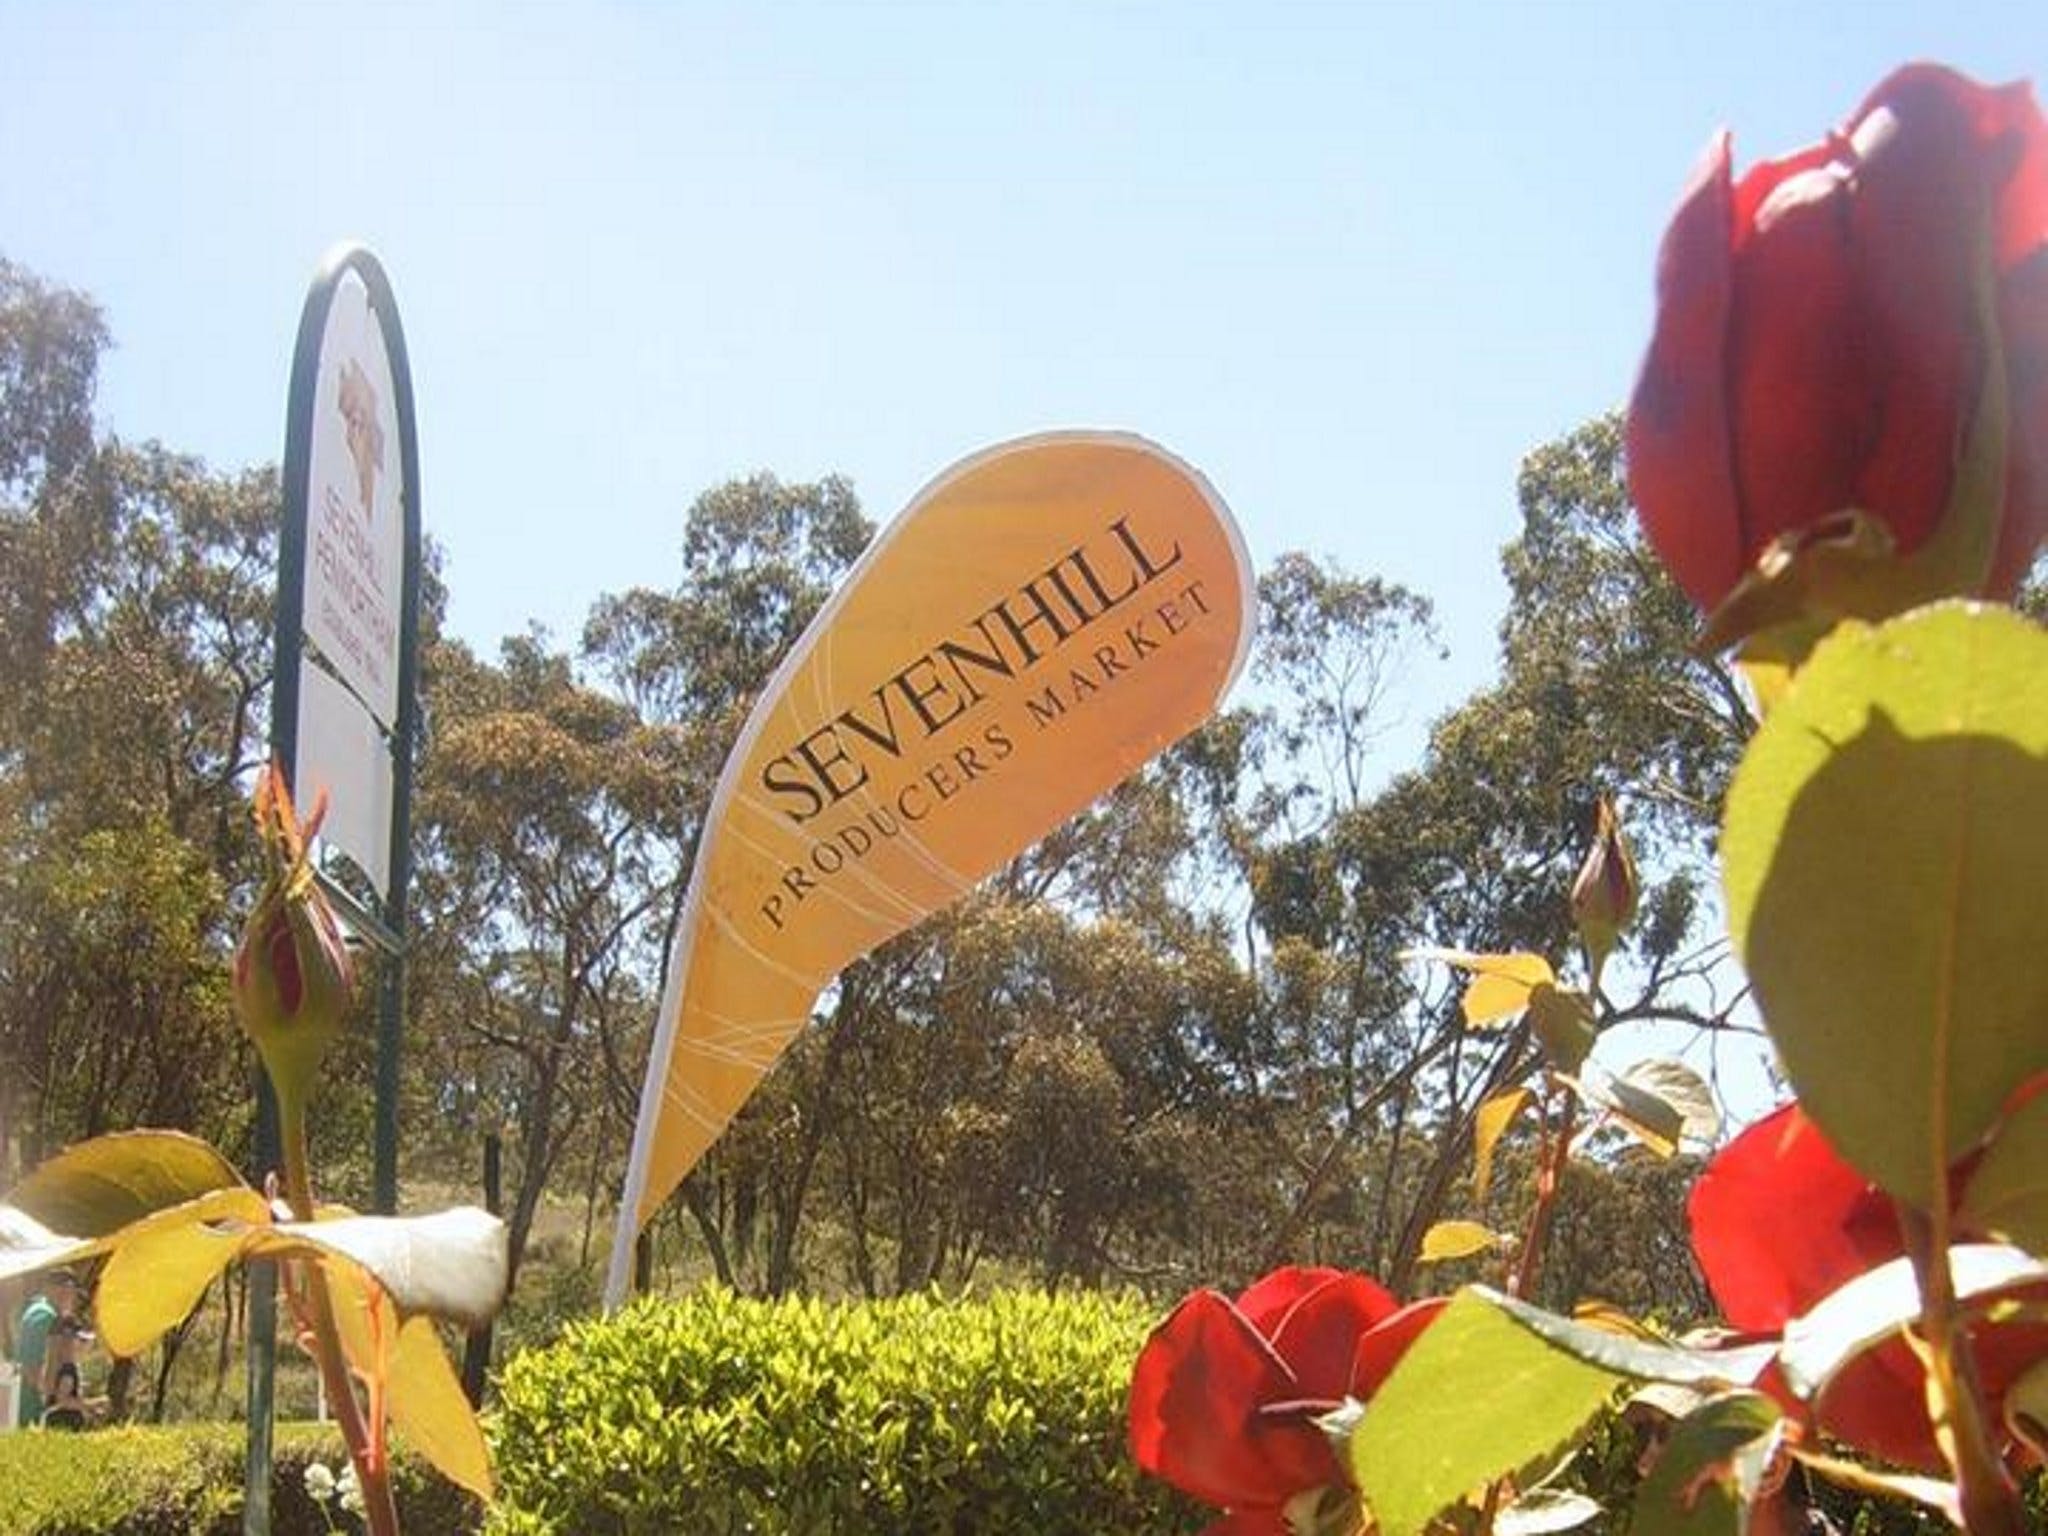 Sevenhill Producers Market - Mount Gambier Accommodation